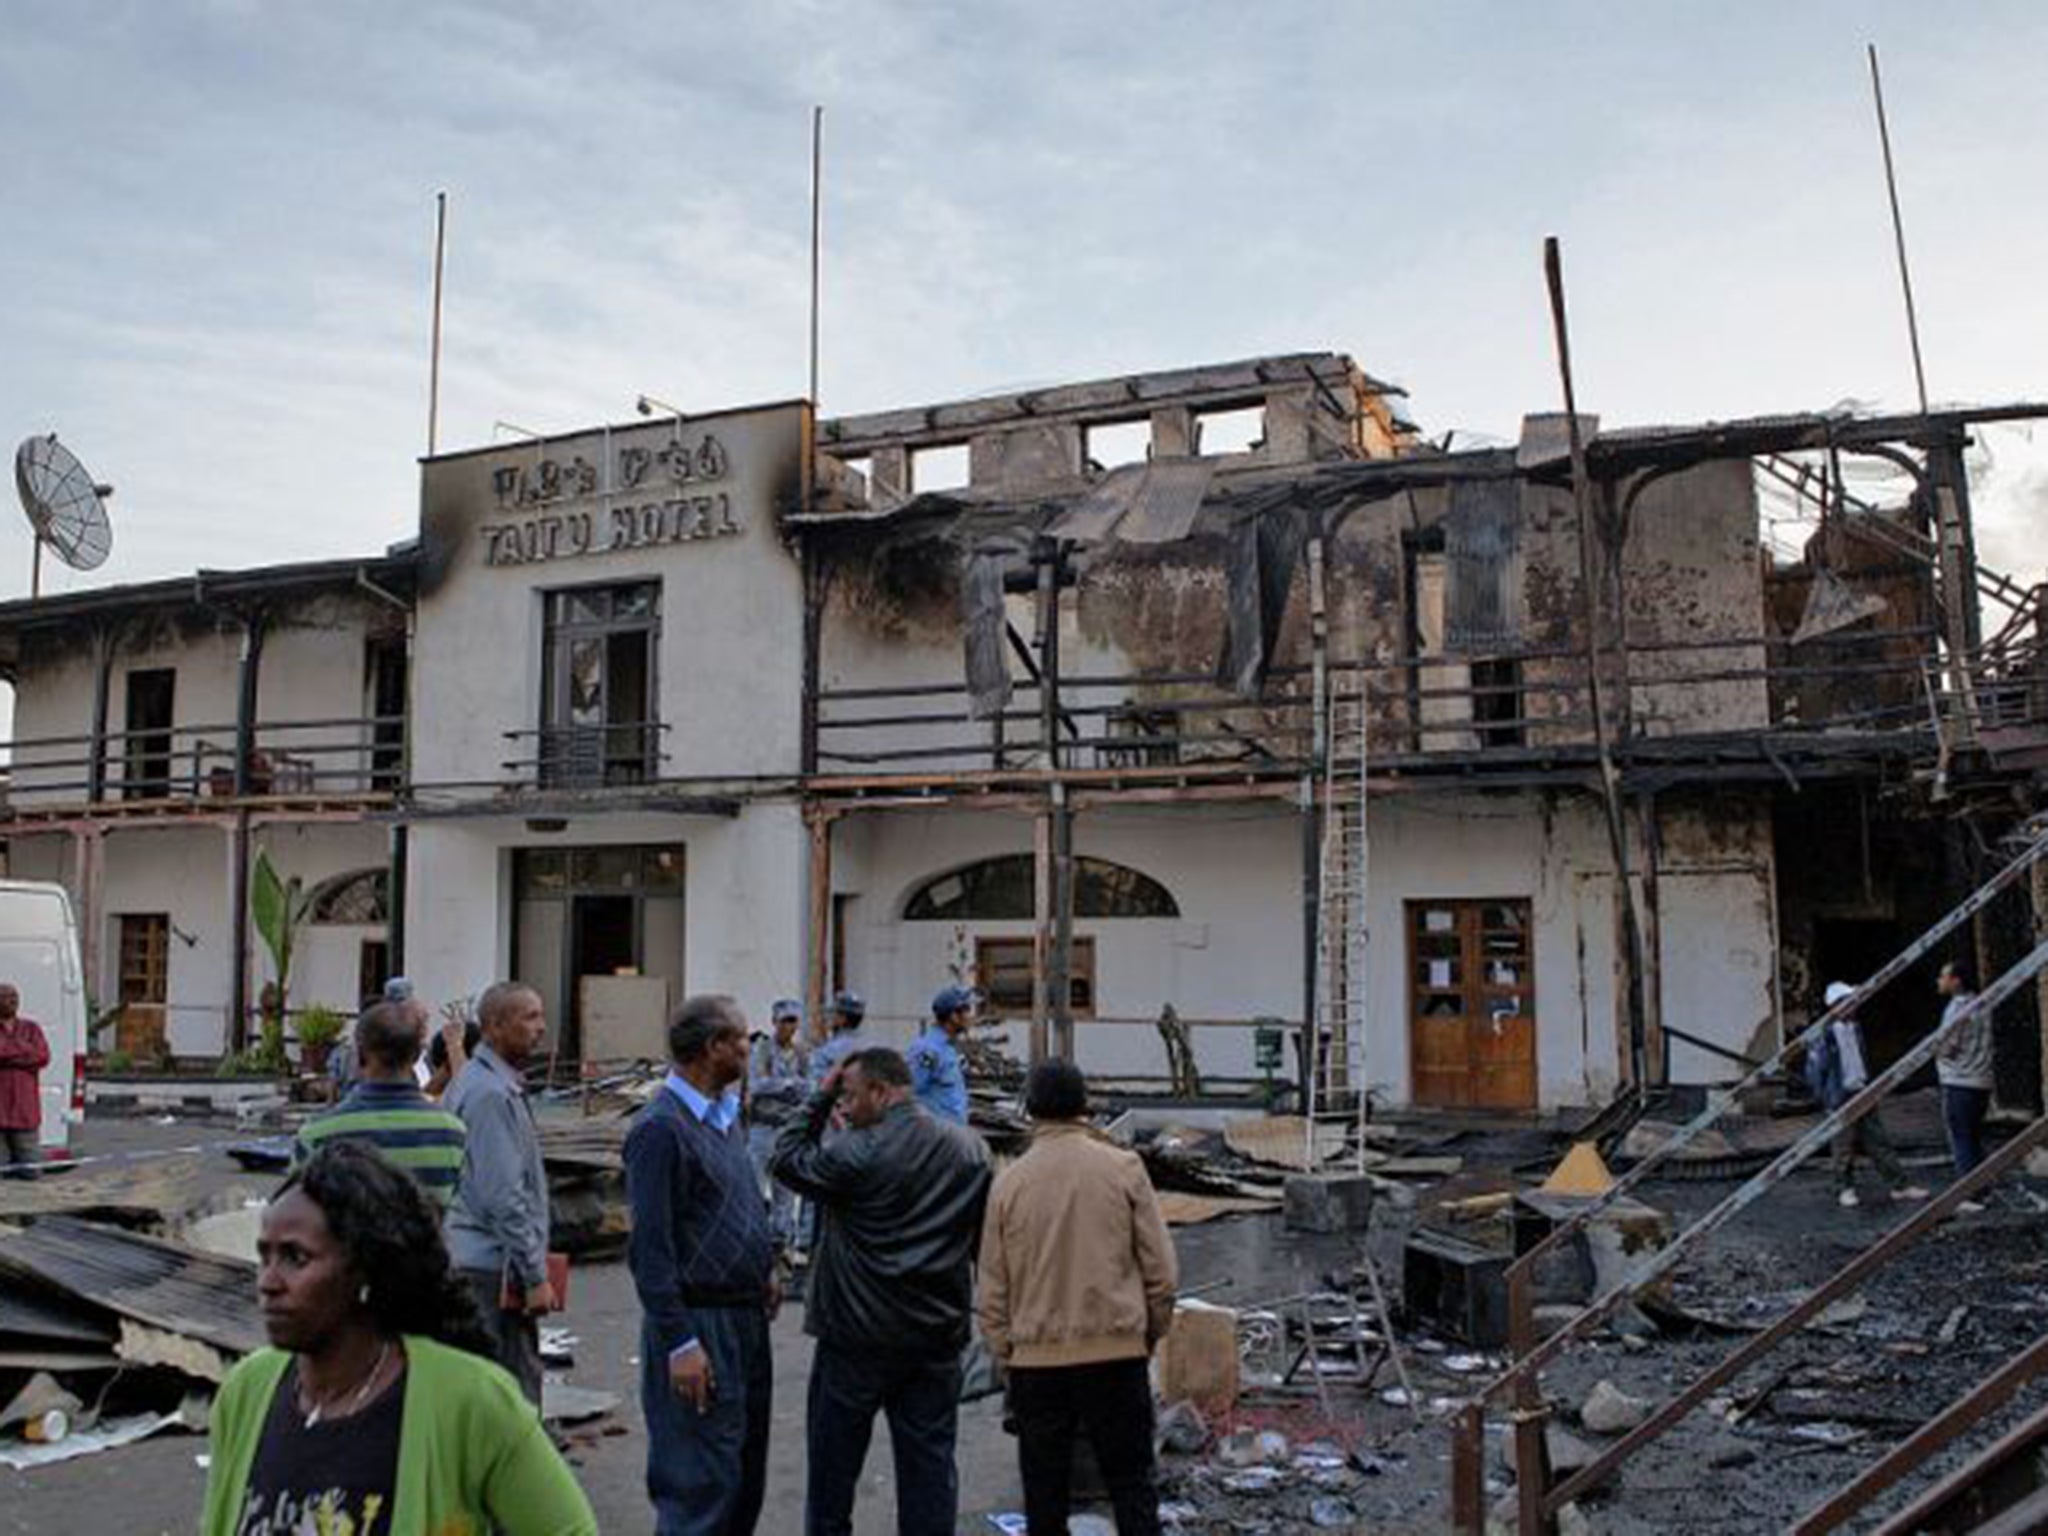 The fire-damaged Taitu Hotel in Addis Ababa after Saturday’s blaze (AFP/Getty)